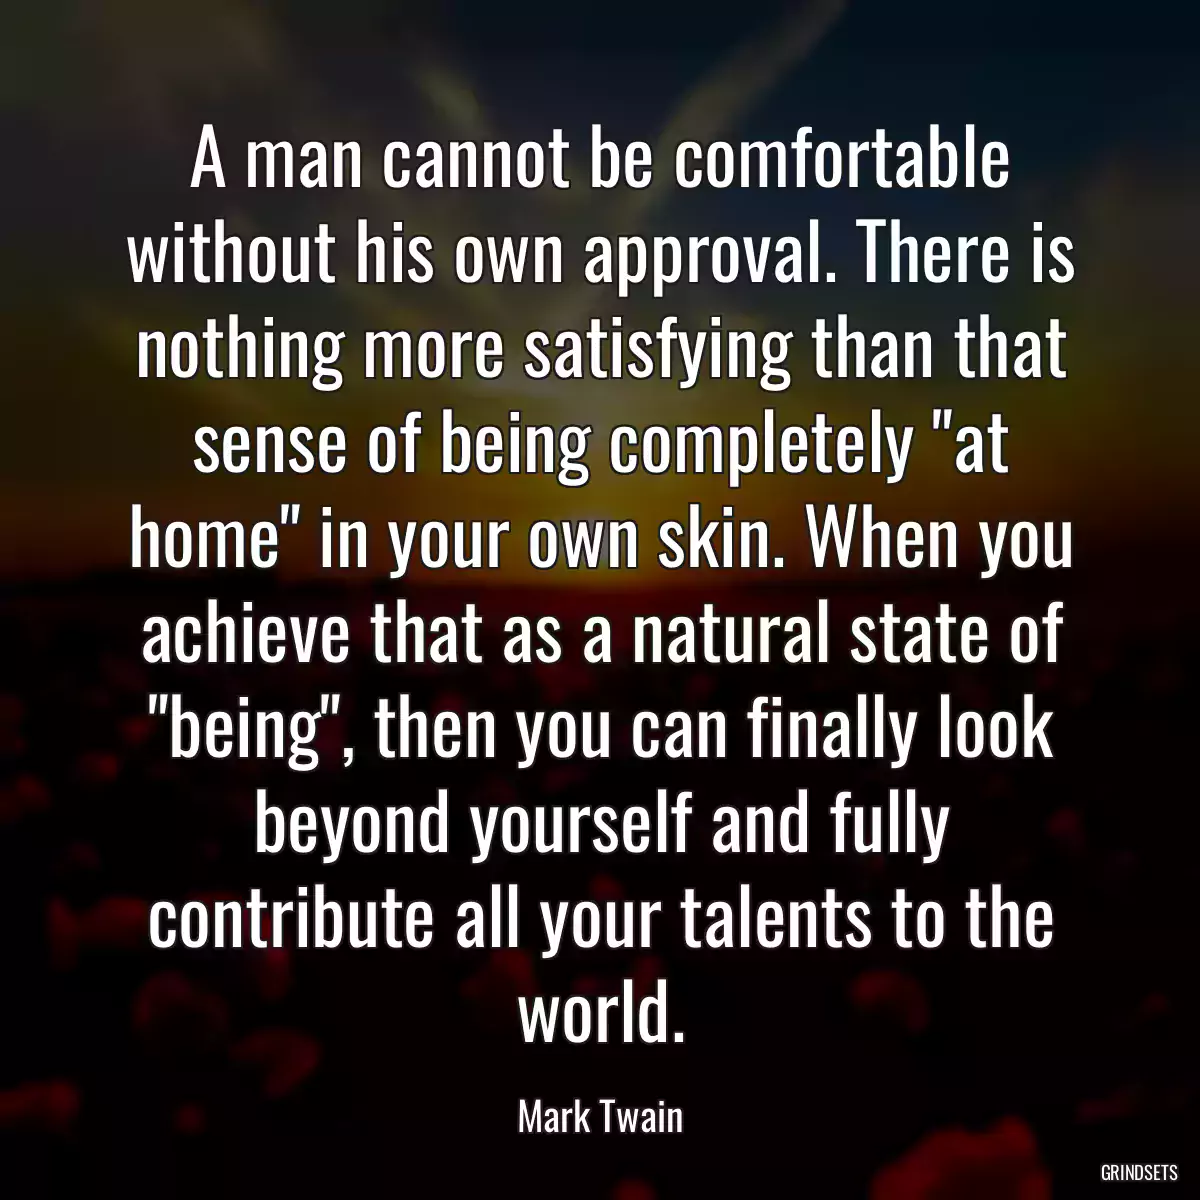 A man cannot be comfortable without his own approval. There is nothing more satisfying than that sense of being completely \